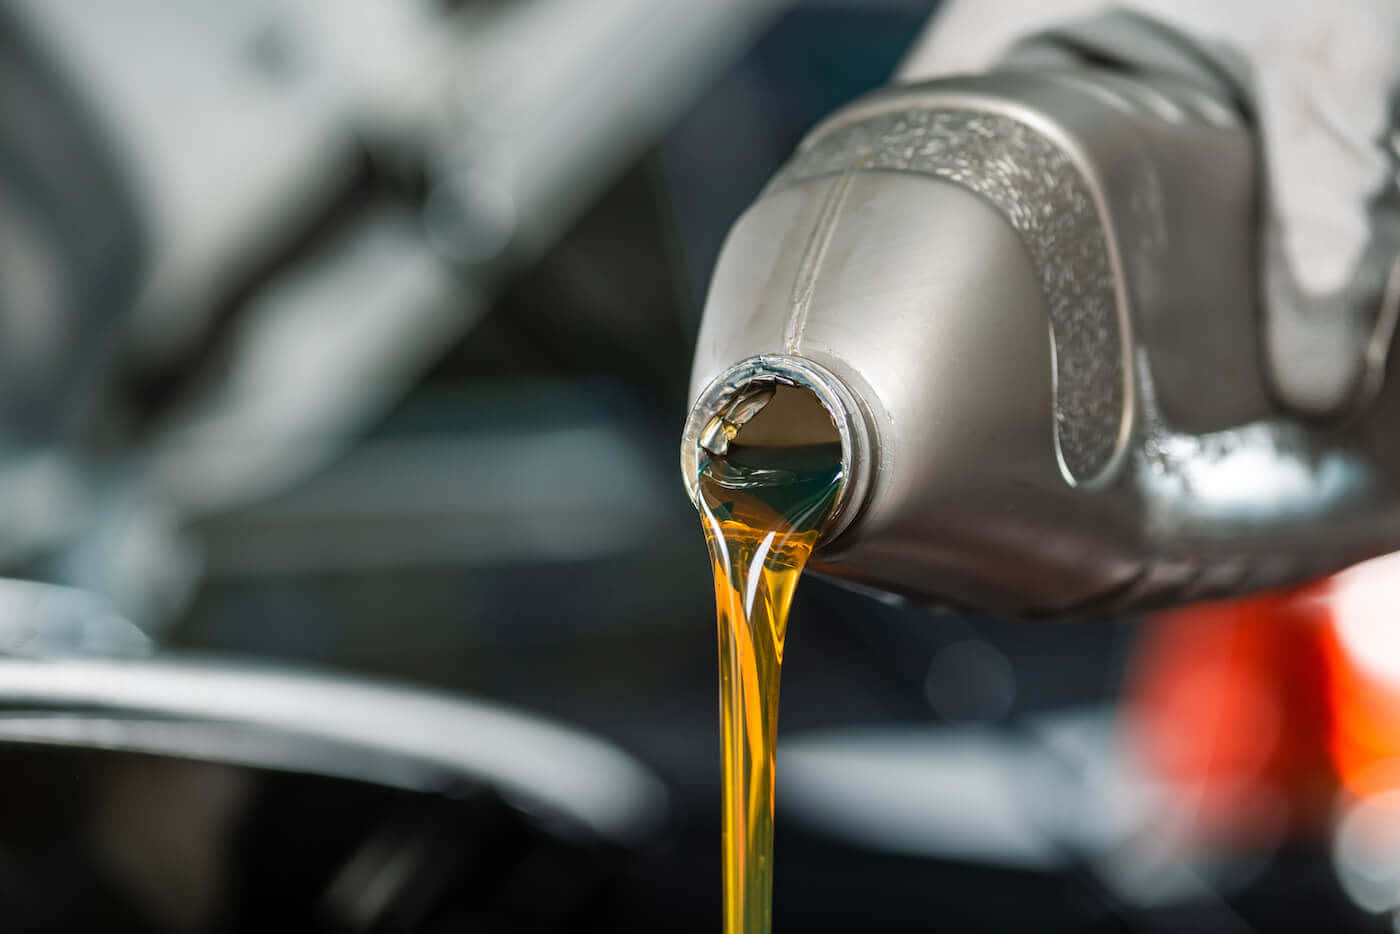 Refilling engine oil can be part of a regular maintenance routine